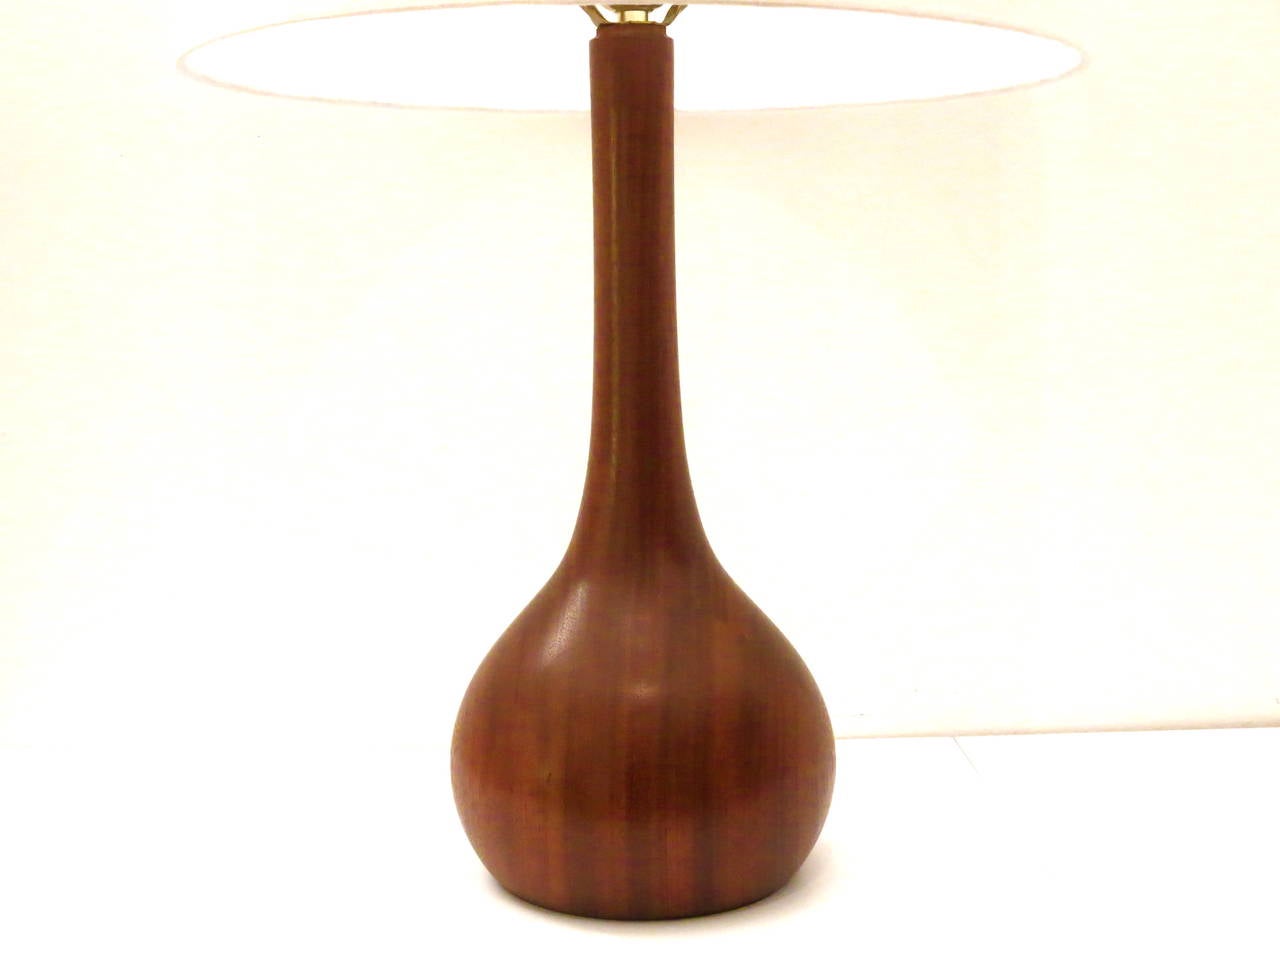 Beautiful single solid teak table lamp, Bulbous sculptural base, rewired and refinished great condition with new lamp shade. The lamp its 24